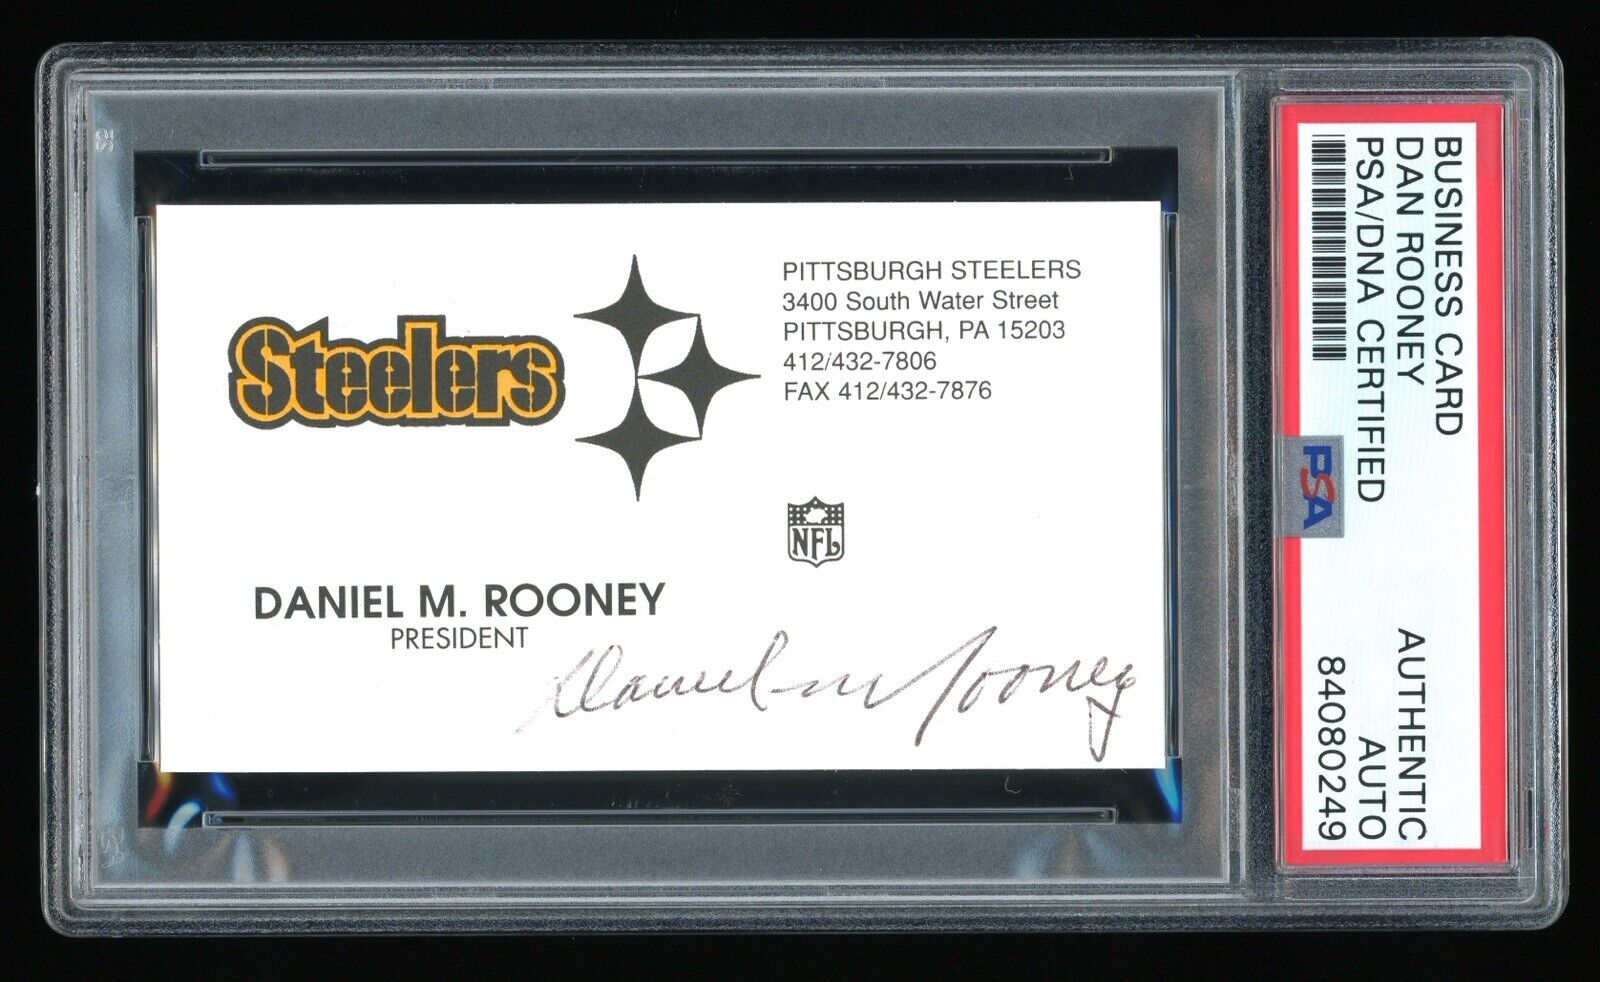 PITTSBURGH STEELERS DAN ROONEY VINTAGE BUSINESS CARD PSA/DNA AUTHENTIC AUTO